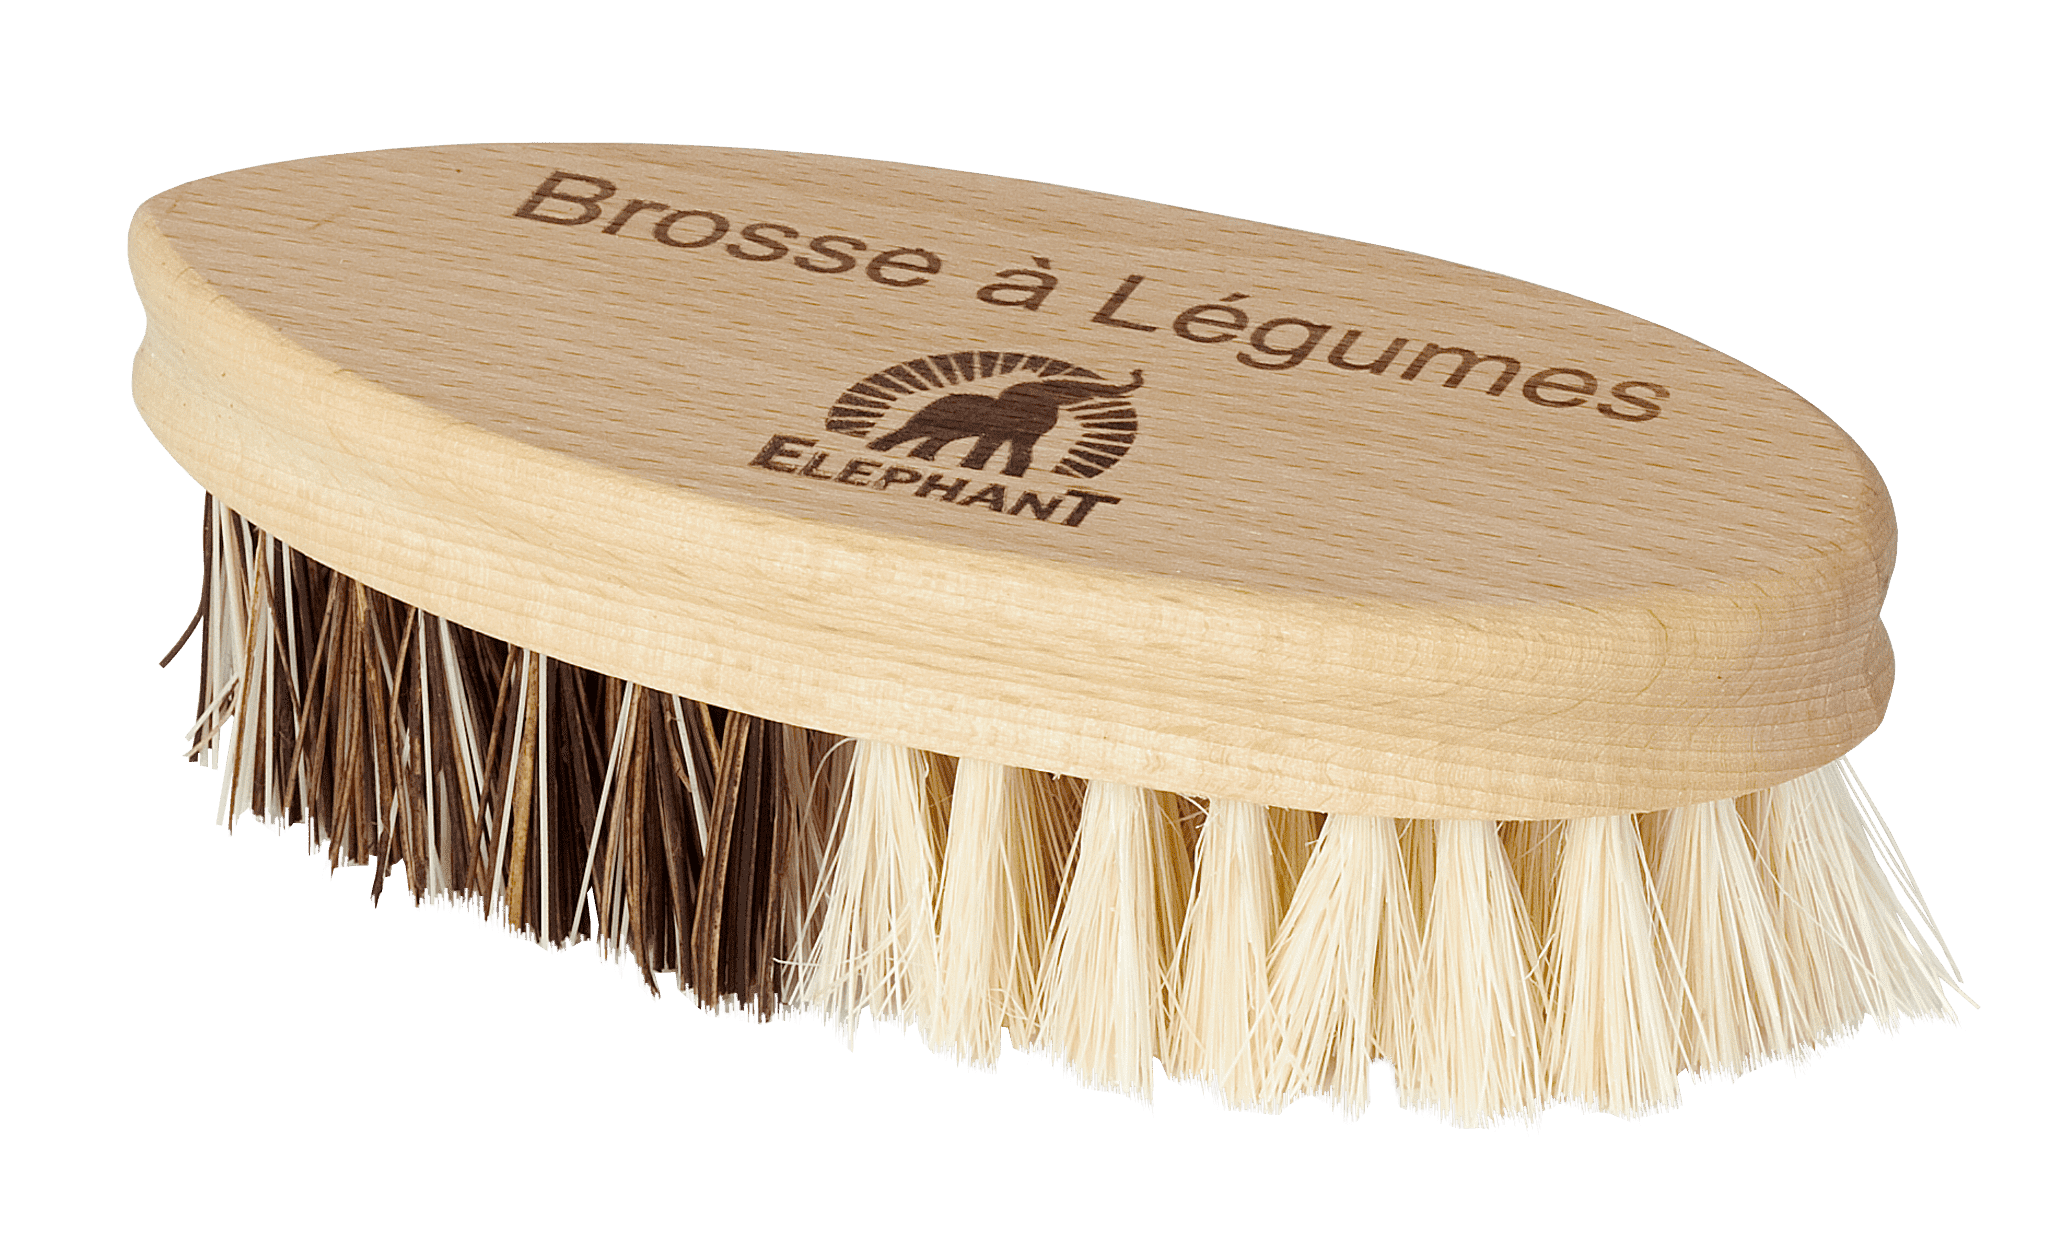 federation-francaise-brosserie-categorie-brosses-maquillage-hygiene-coiffure